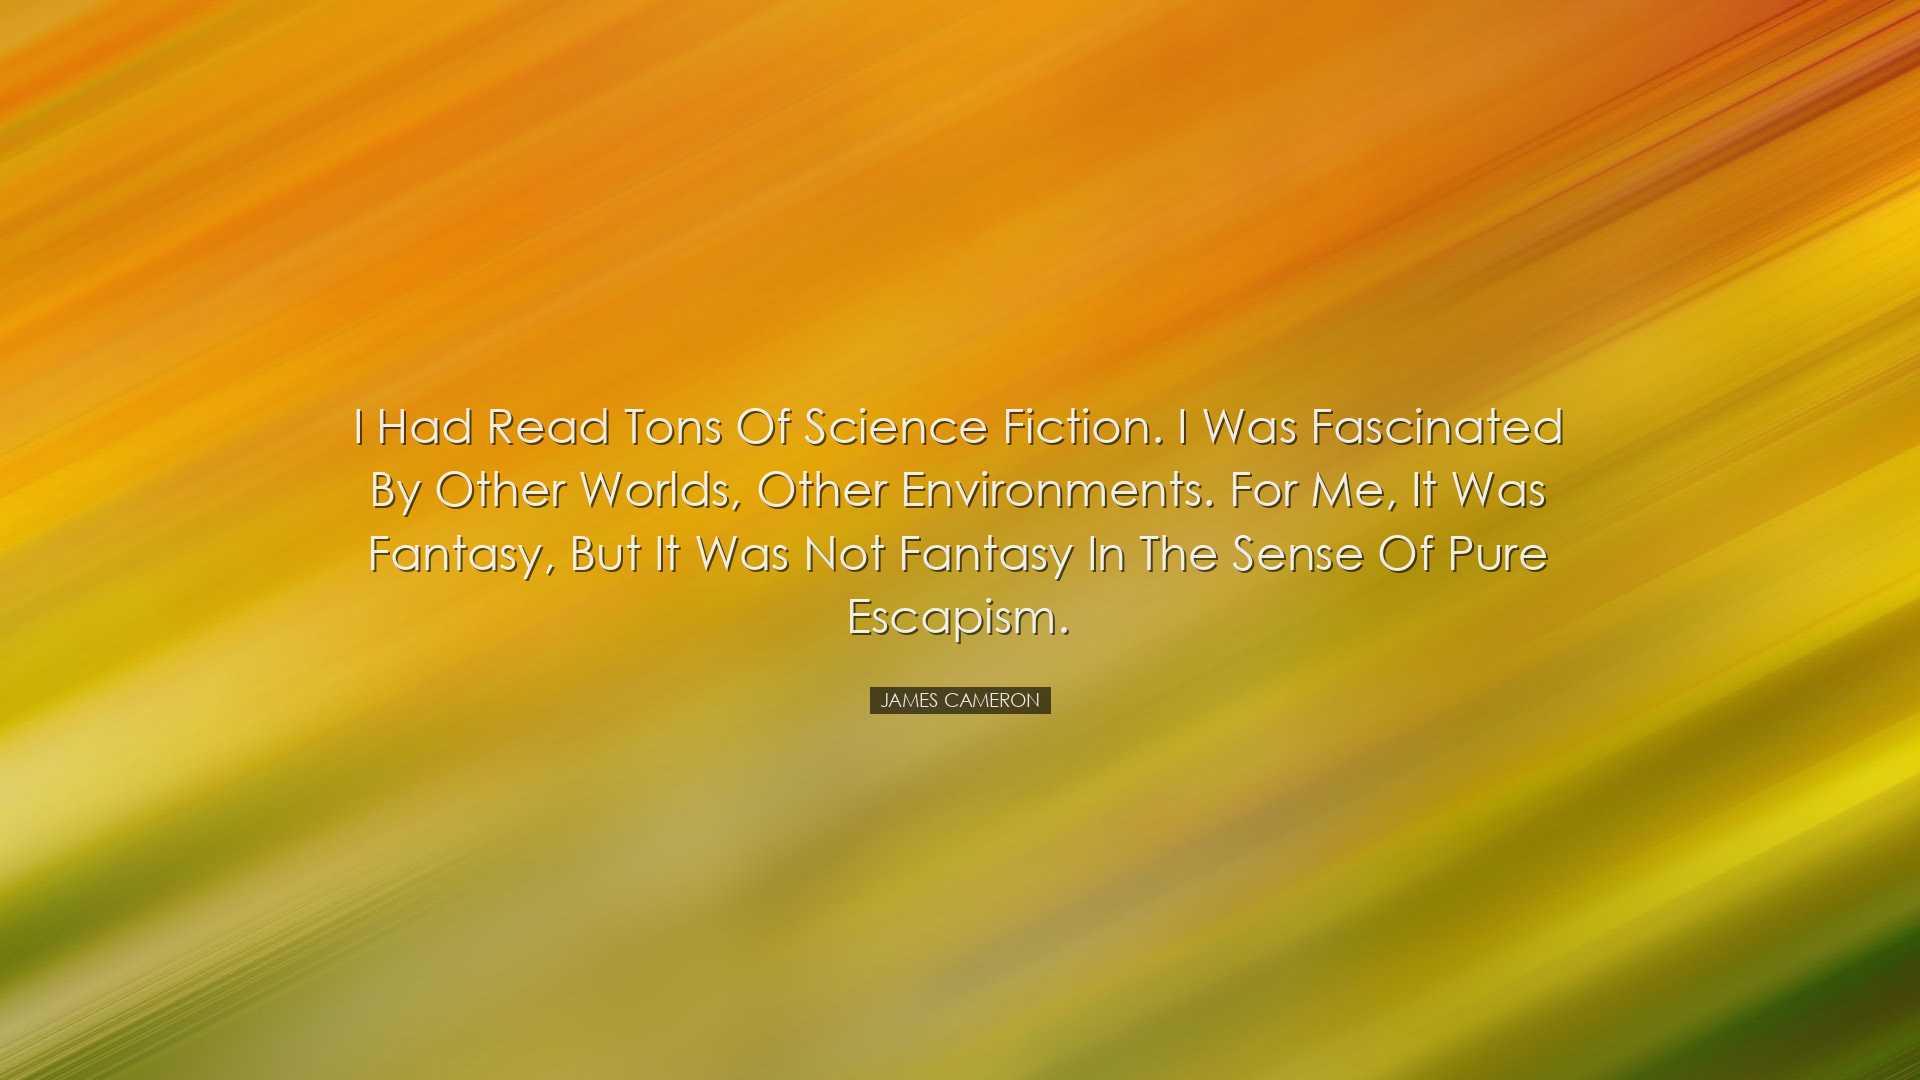 I had read tons of science fiction. I was fascinated by other worl